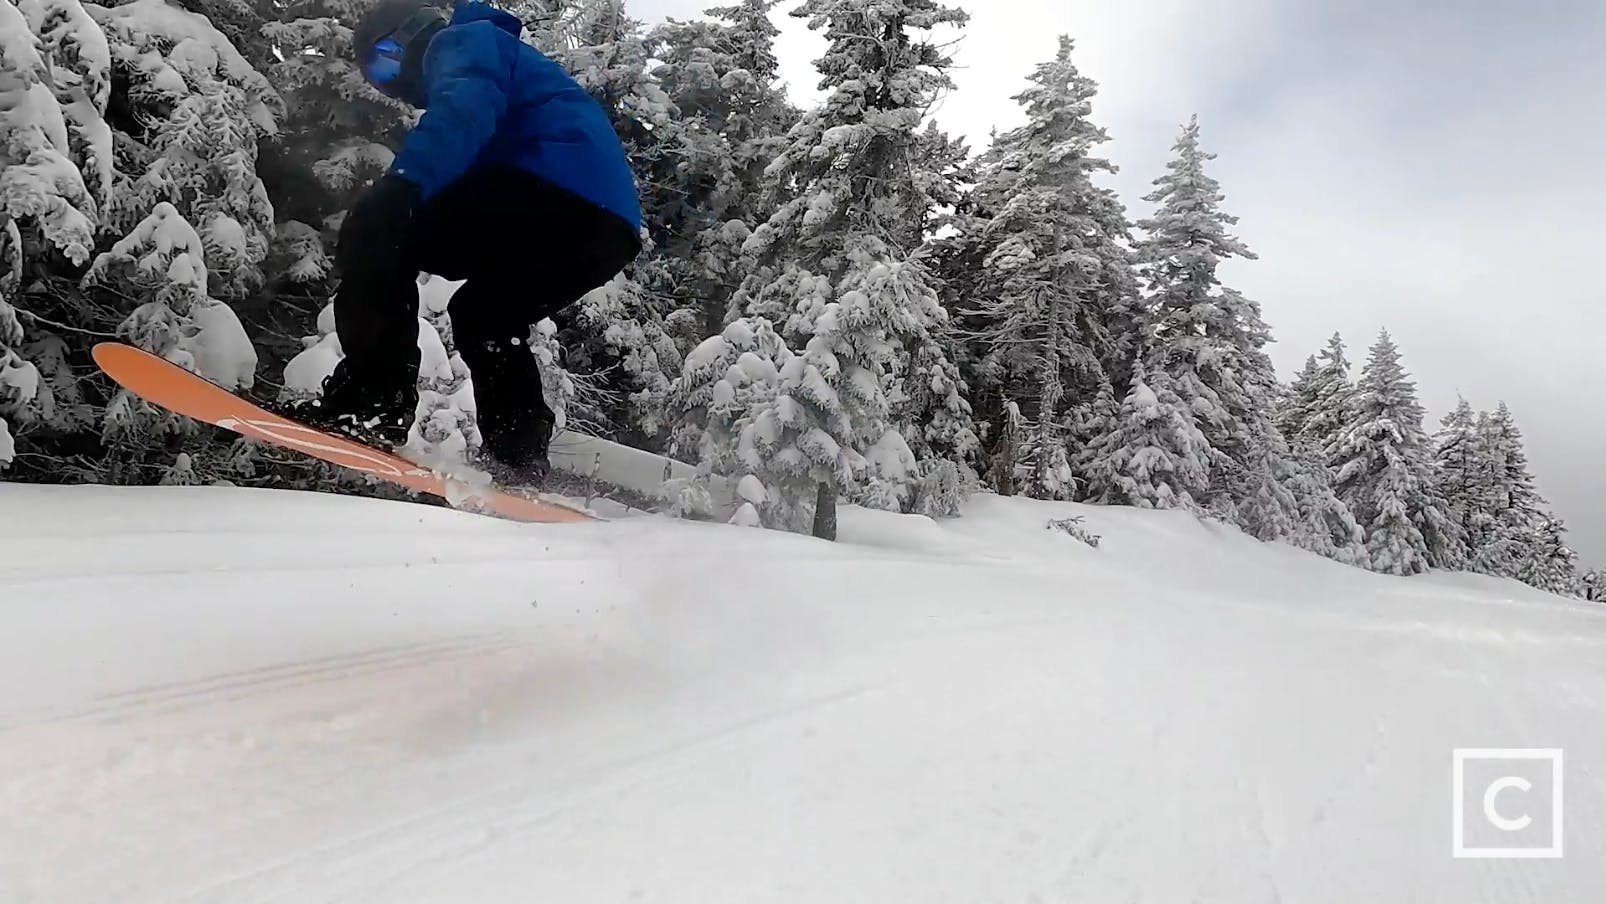 Curated expert Franco DiRienzo jumping through the air on the Never Summer Harpoon snowboard